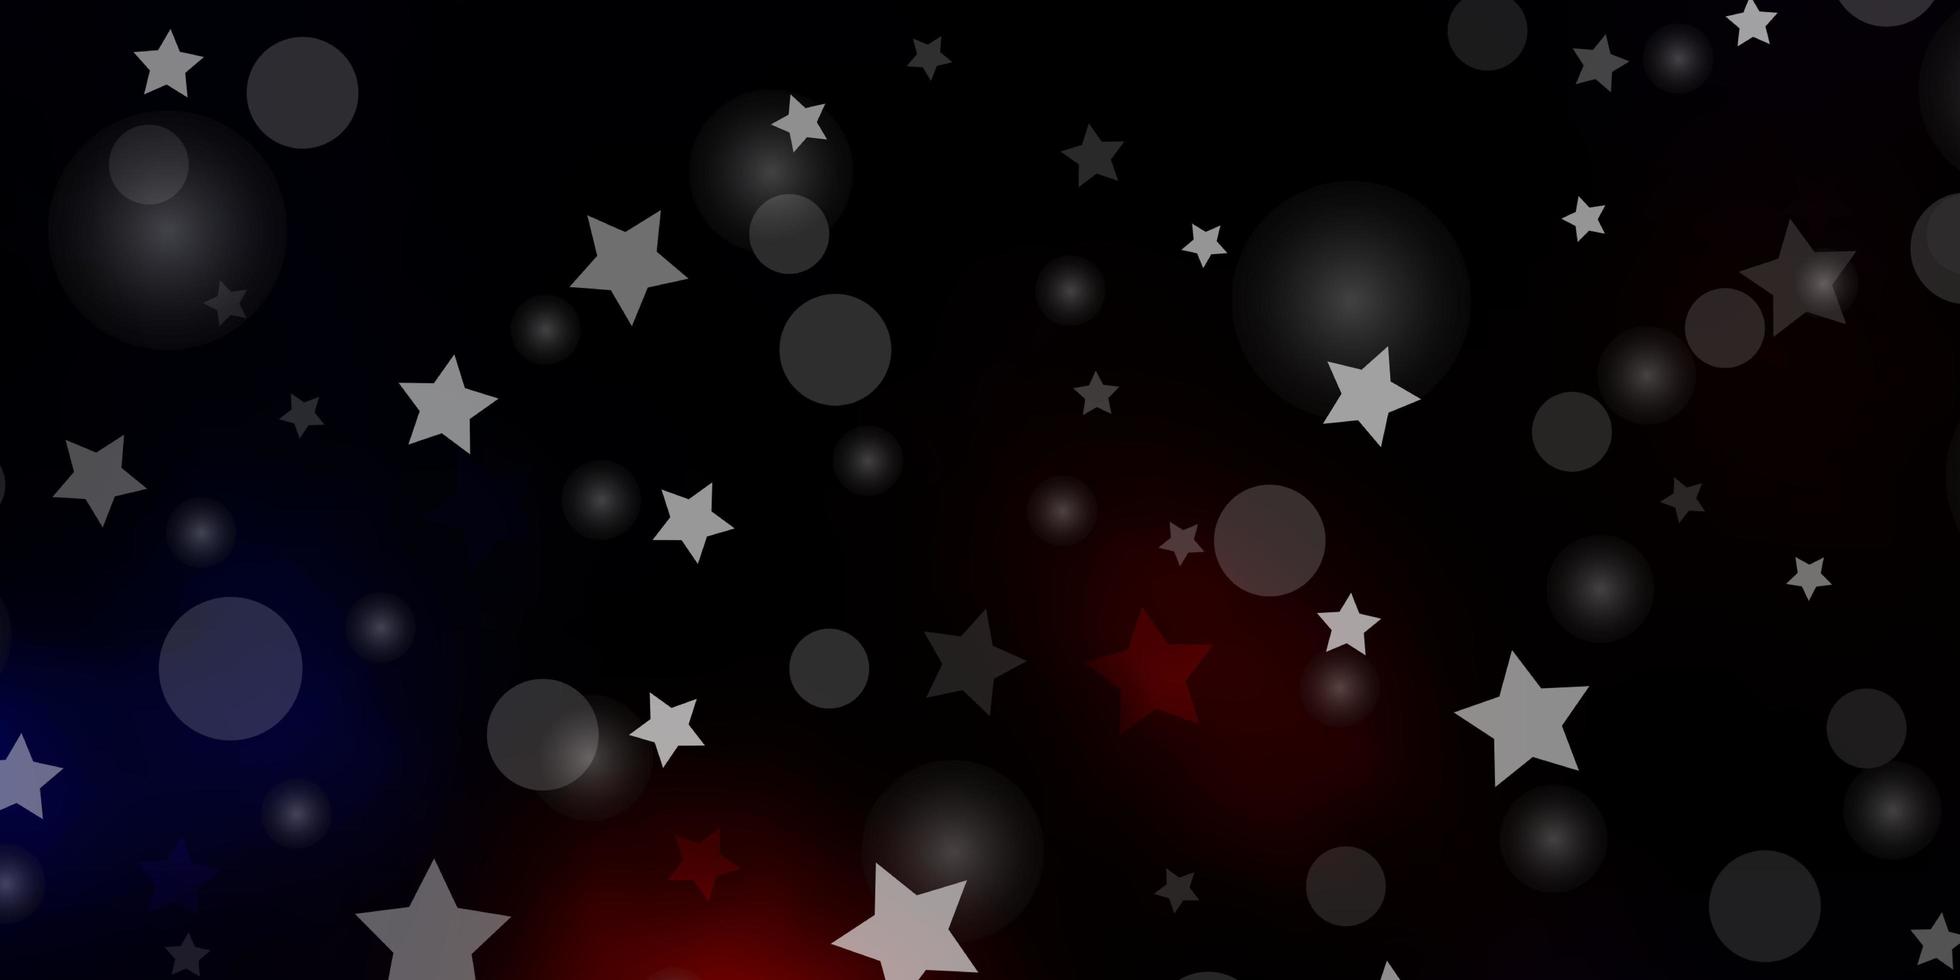 Dark Red vector template with circles, stars.